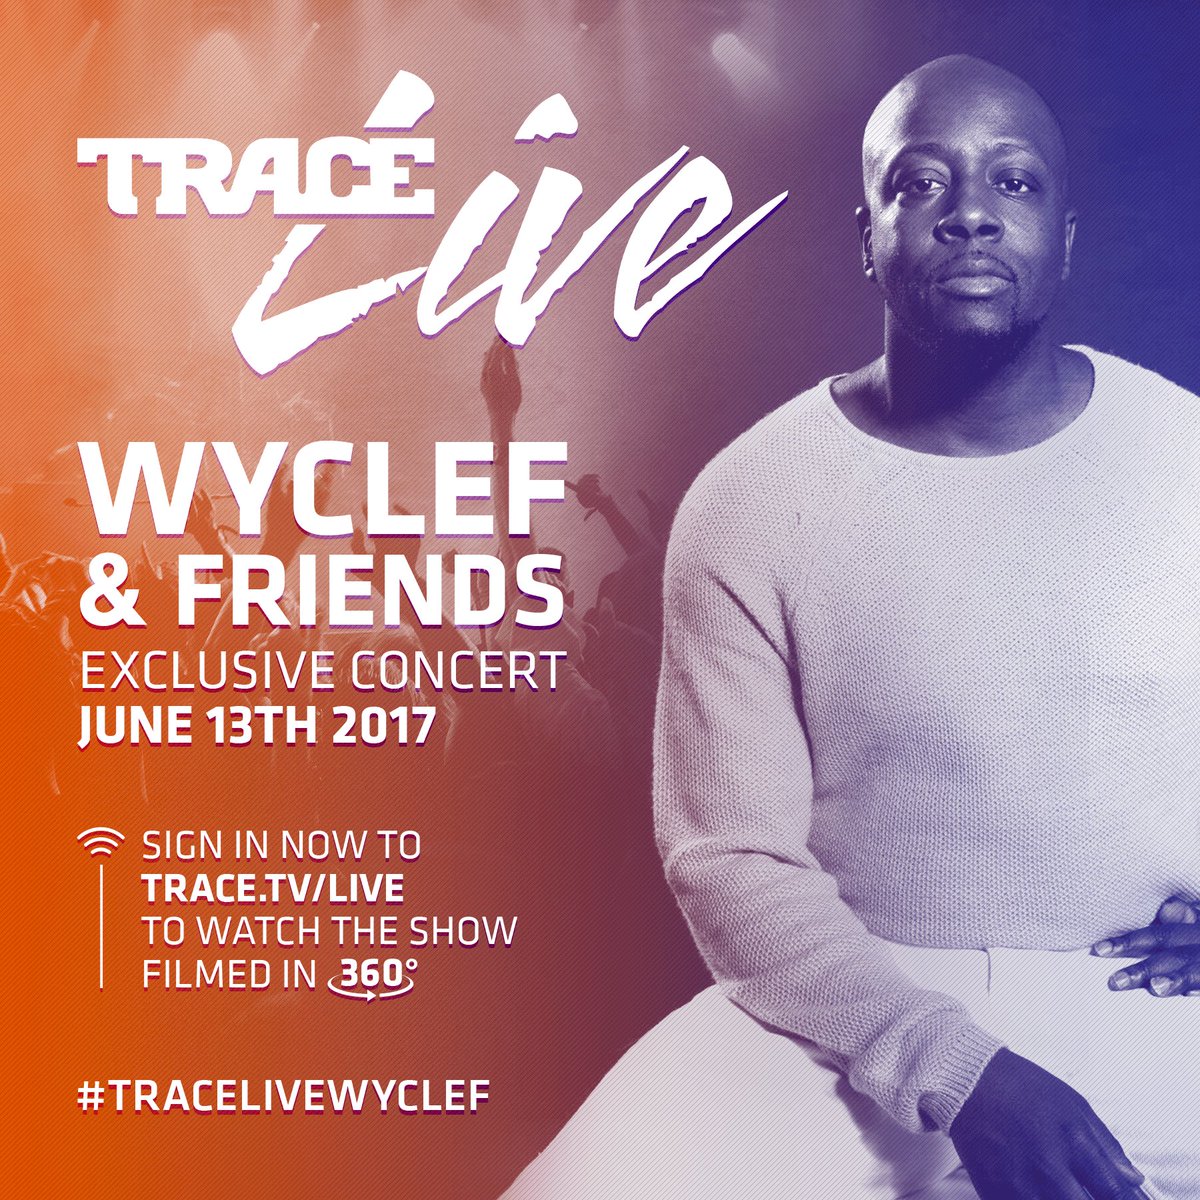 TRACE LIVE IN 1 HOUR!!!!! https://t.co/LCWtZ6Ux4k #TRACELiveWyclef https://t.co/Bfig6FQ13F